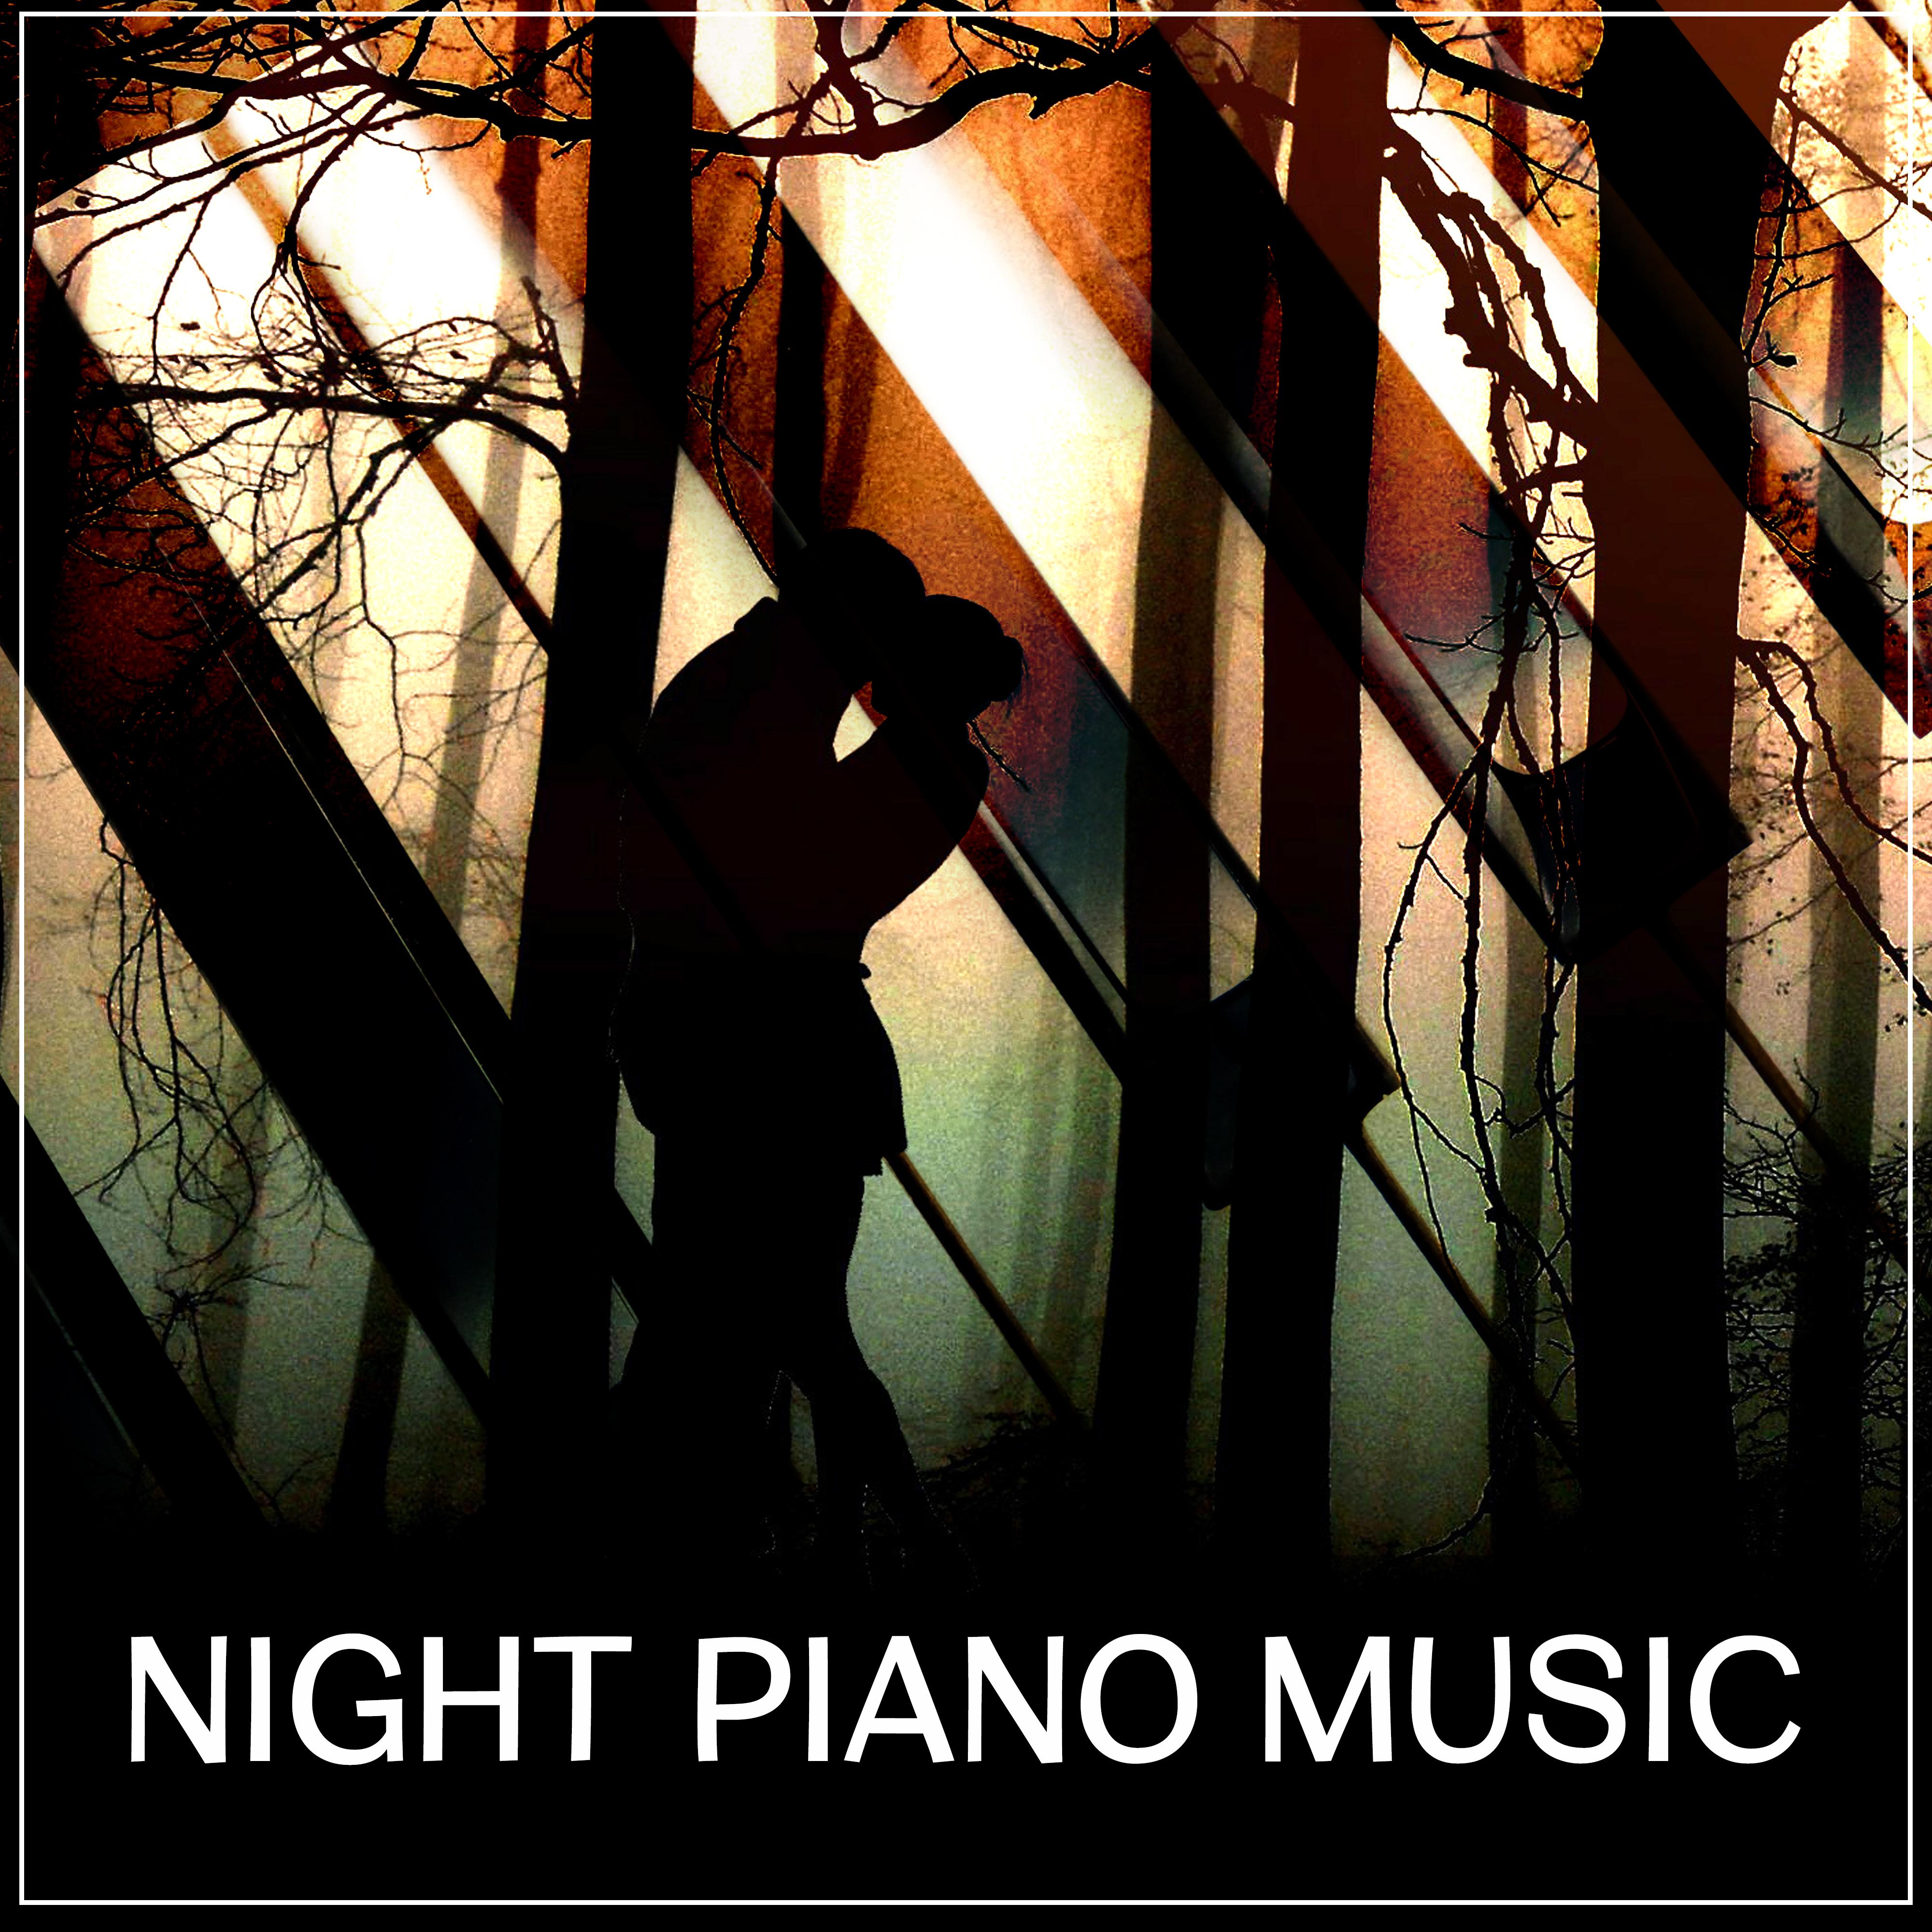 Night Piano Music – Romantic Jazz Sounds, Dinner by Candlelight, Smooth Jazz at Night, Melancholy Songs, Jazz for Relaxation, Soothing Piano